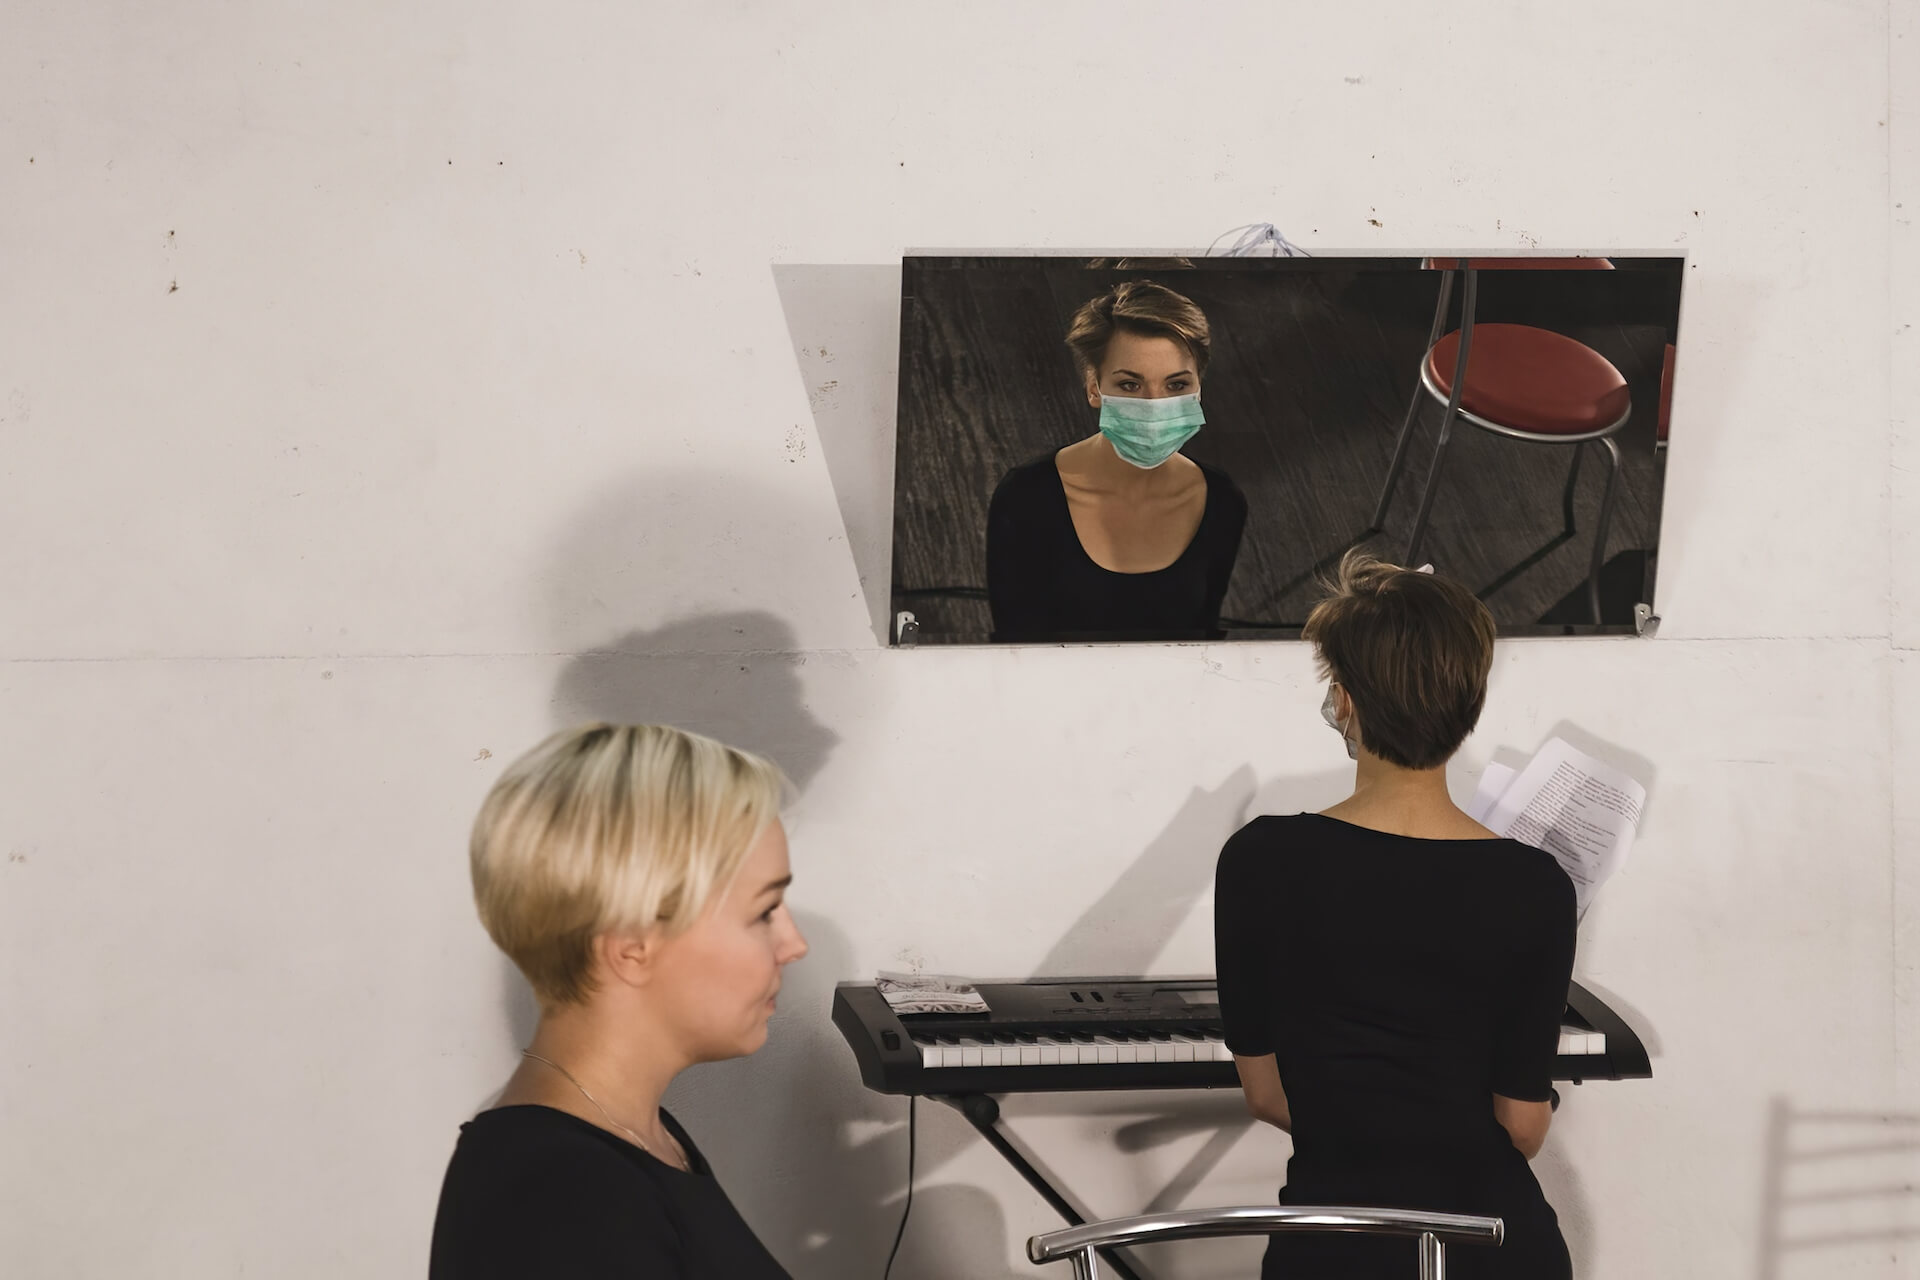 Behind shot of a performer sitting in front of a mirror wearing a disposable mask. The performer is looking at themselves. There is another performer sitting sideways behind the one with a mirror.